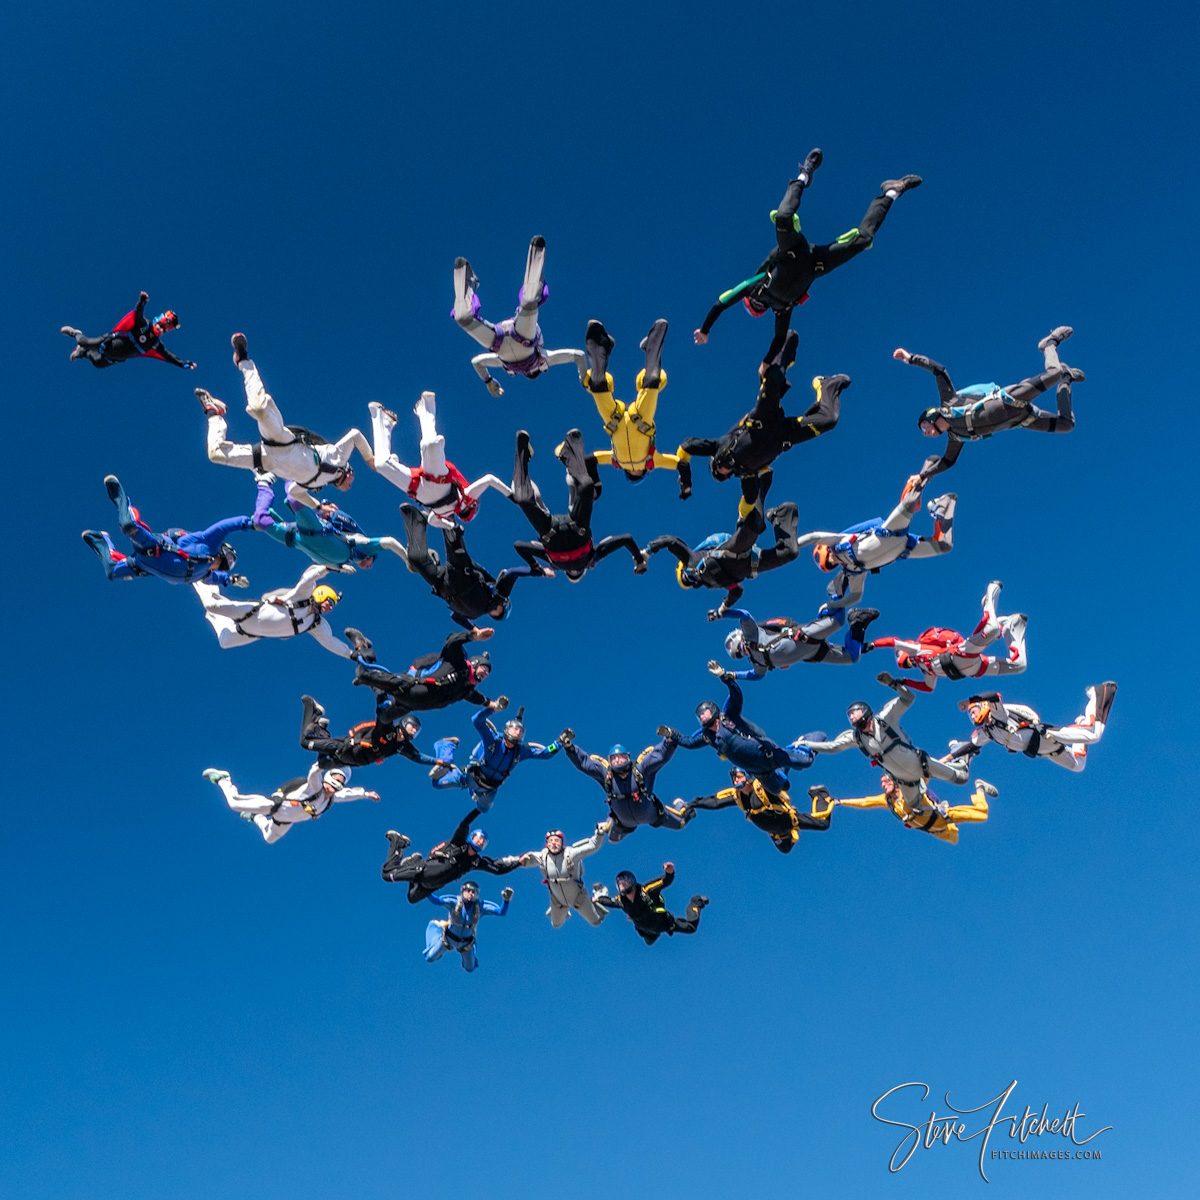 Seniors of the Sky: Skydivers Over Sixty Set New Record!